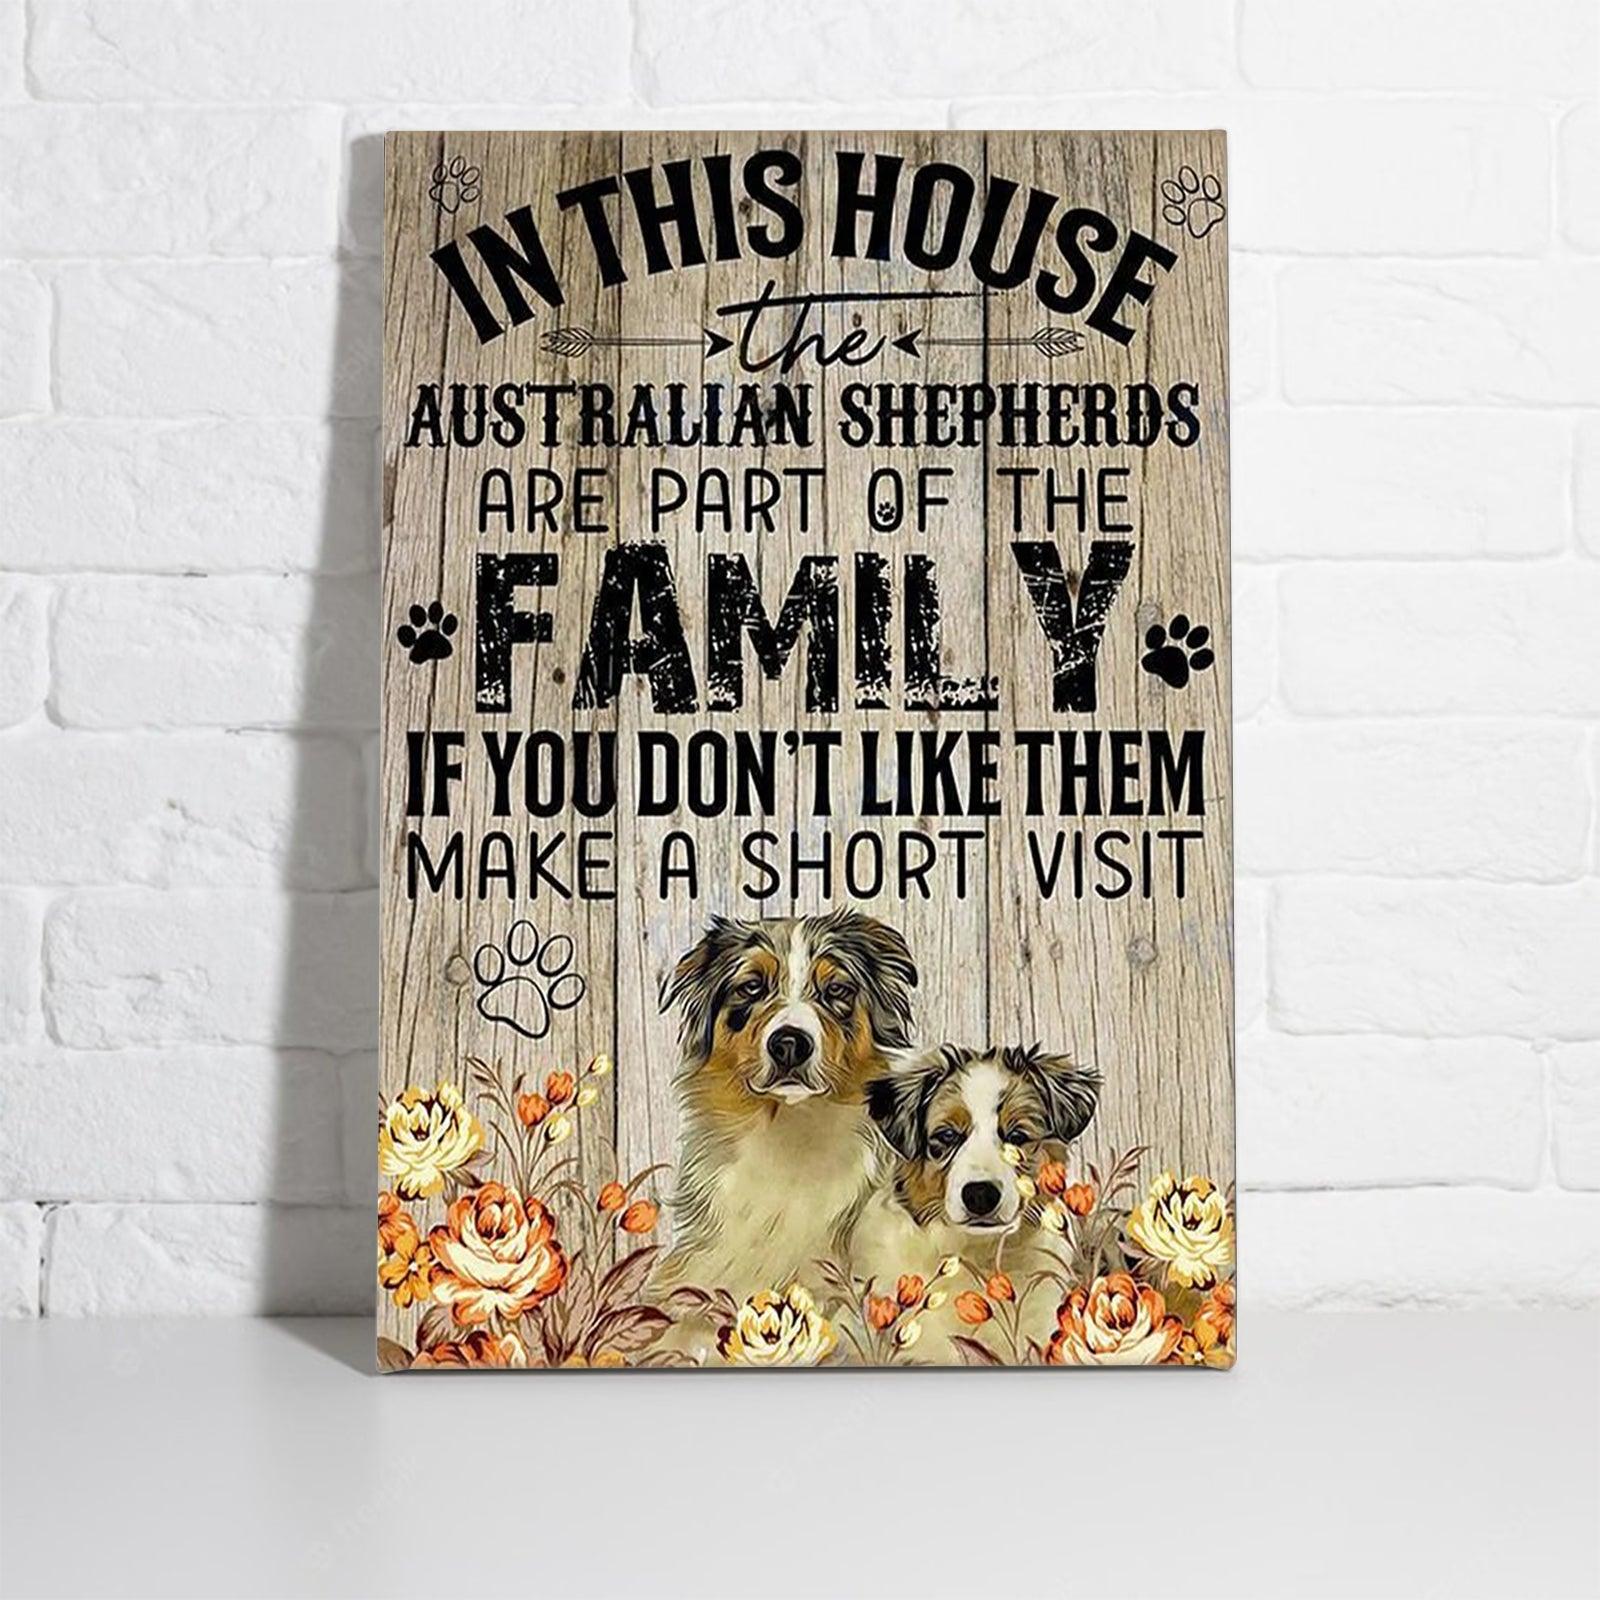 Australian Shepherd Portrait Premium Wrapped Canvas - In This House The Australian Shepherds Are Part Of The Family Canvas, Perfect Gift For Dog Lover - Amzanimalsgift